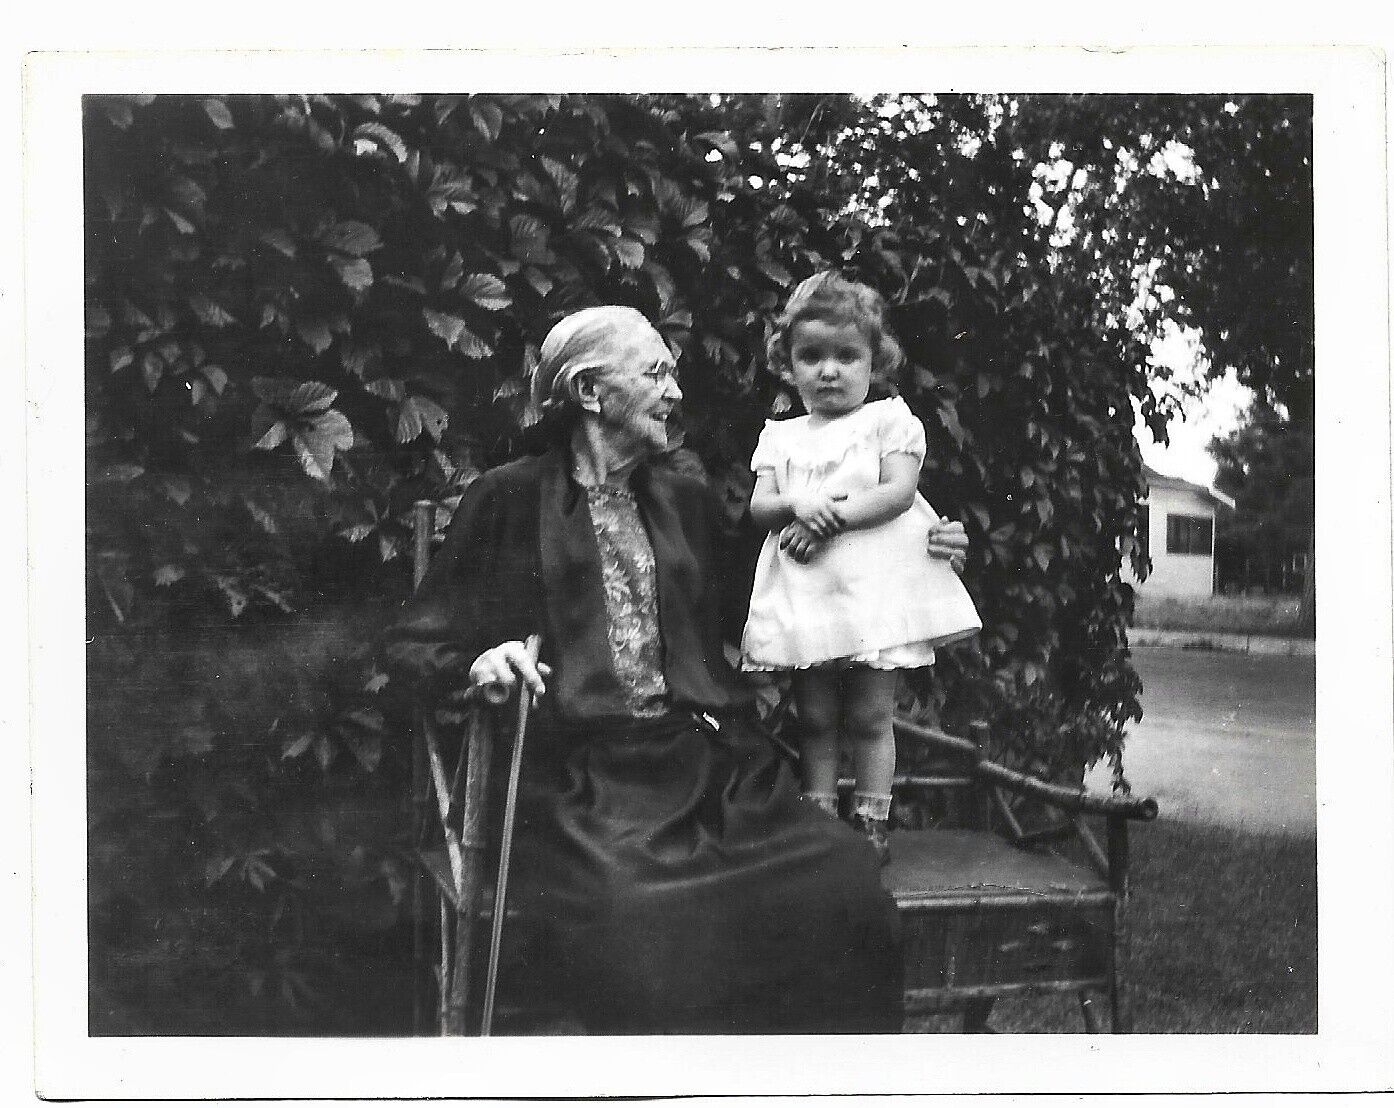 Vintage 1920s Photo of Great Grandmother with Little Girl Arroyo Grande Calif.